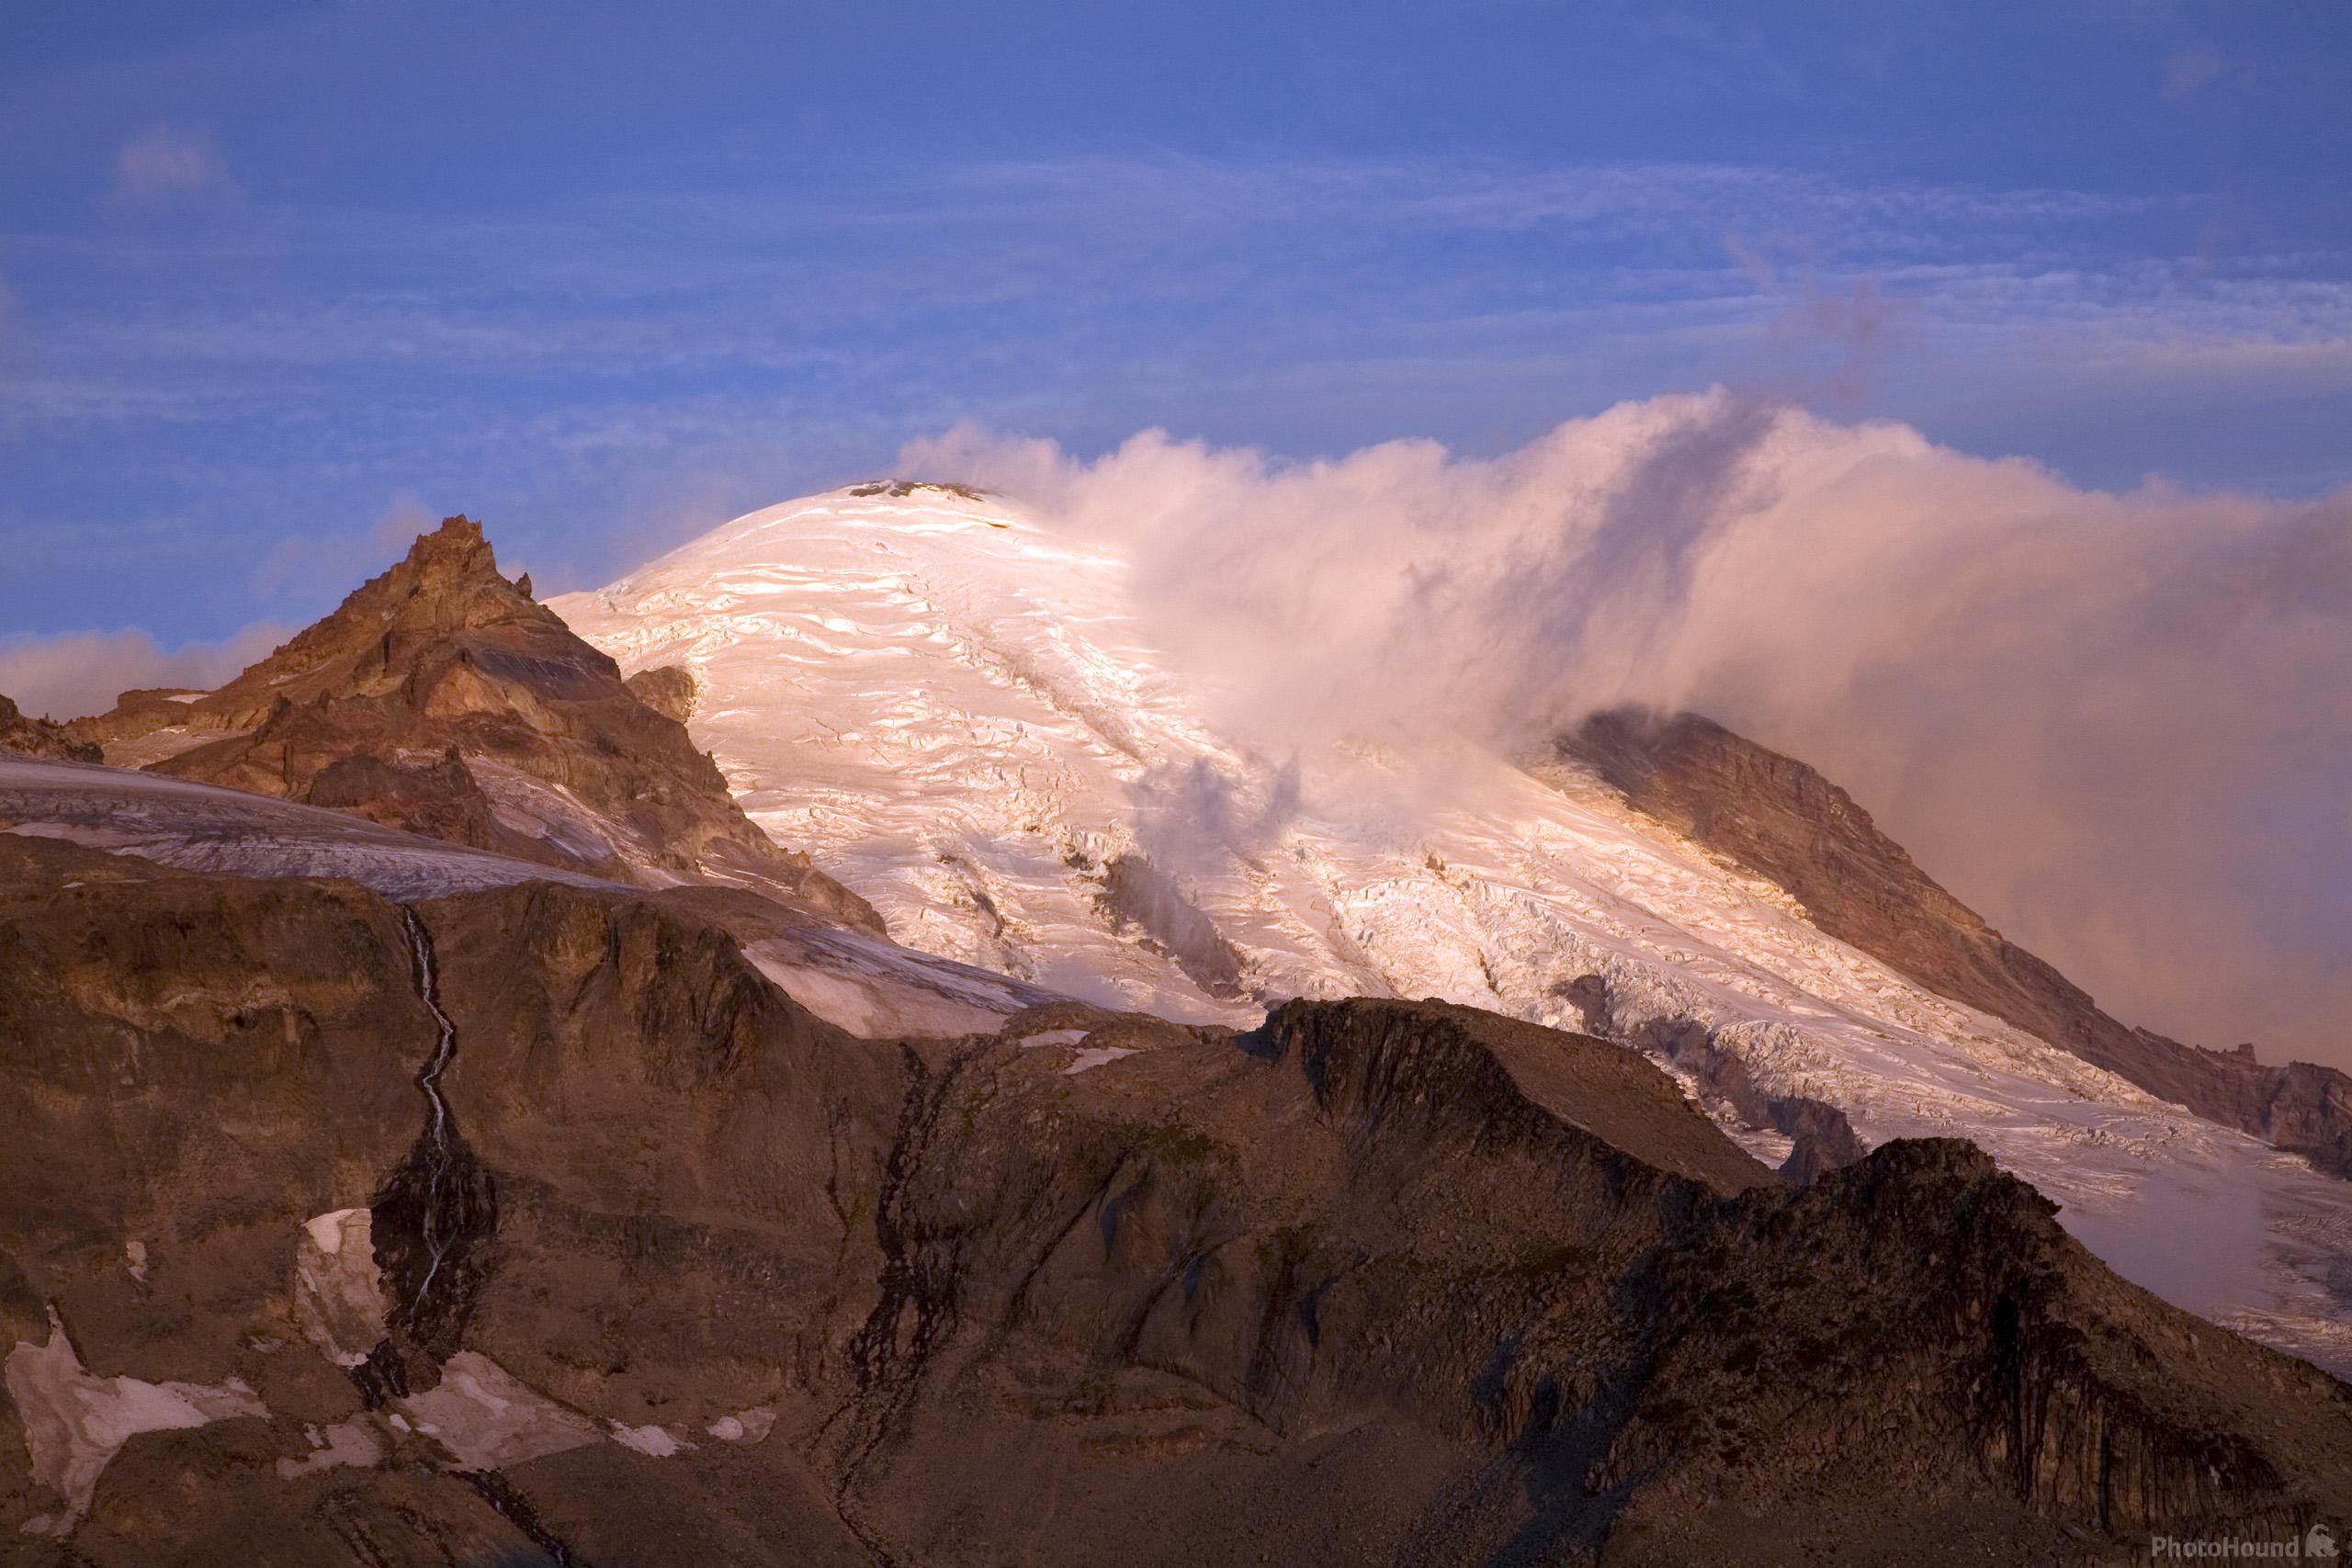 Image of Panhandle Gap, Mount Rainier National Park by T. Kirkendall and V. Spring